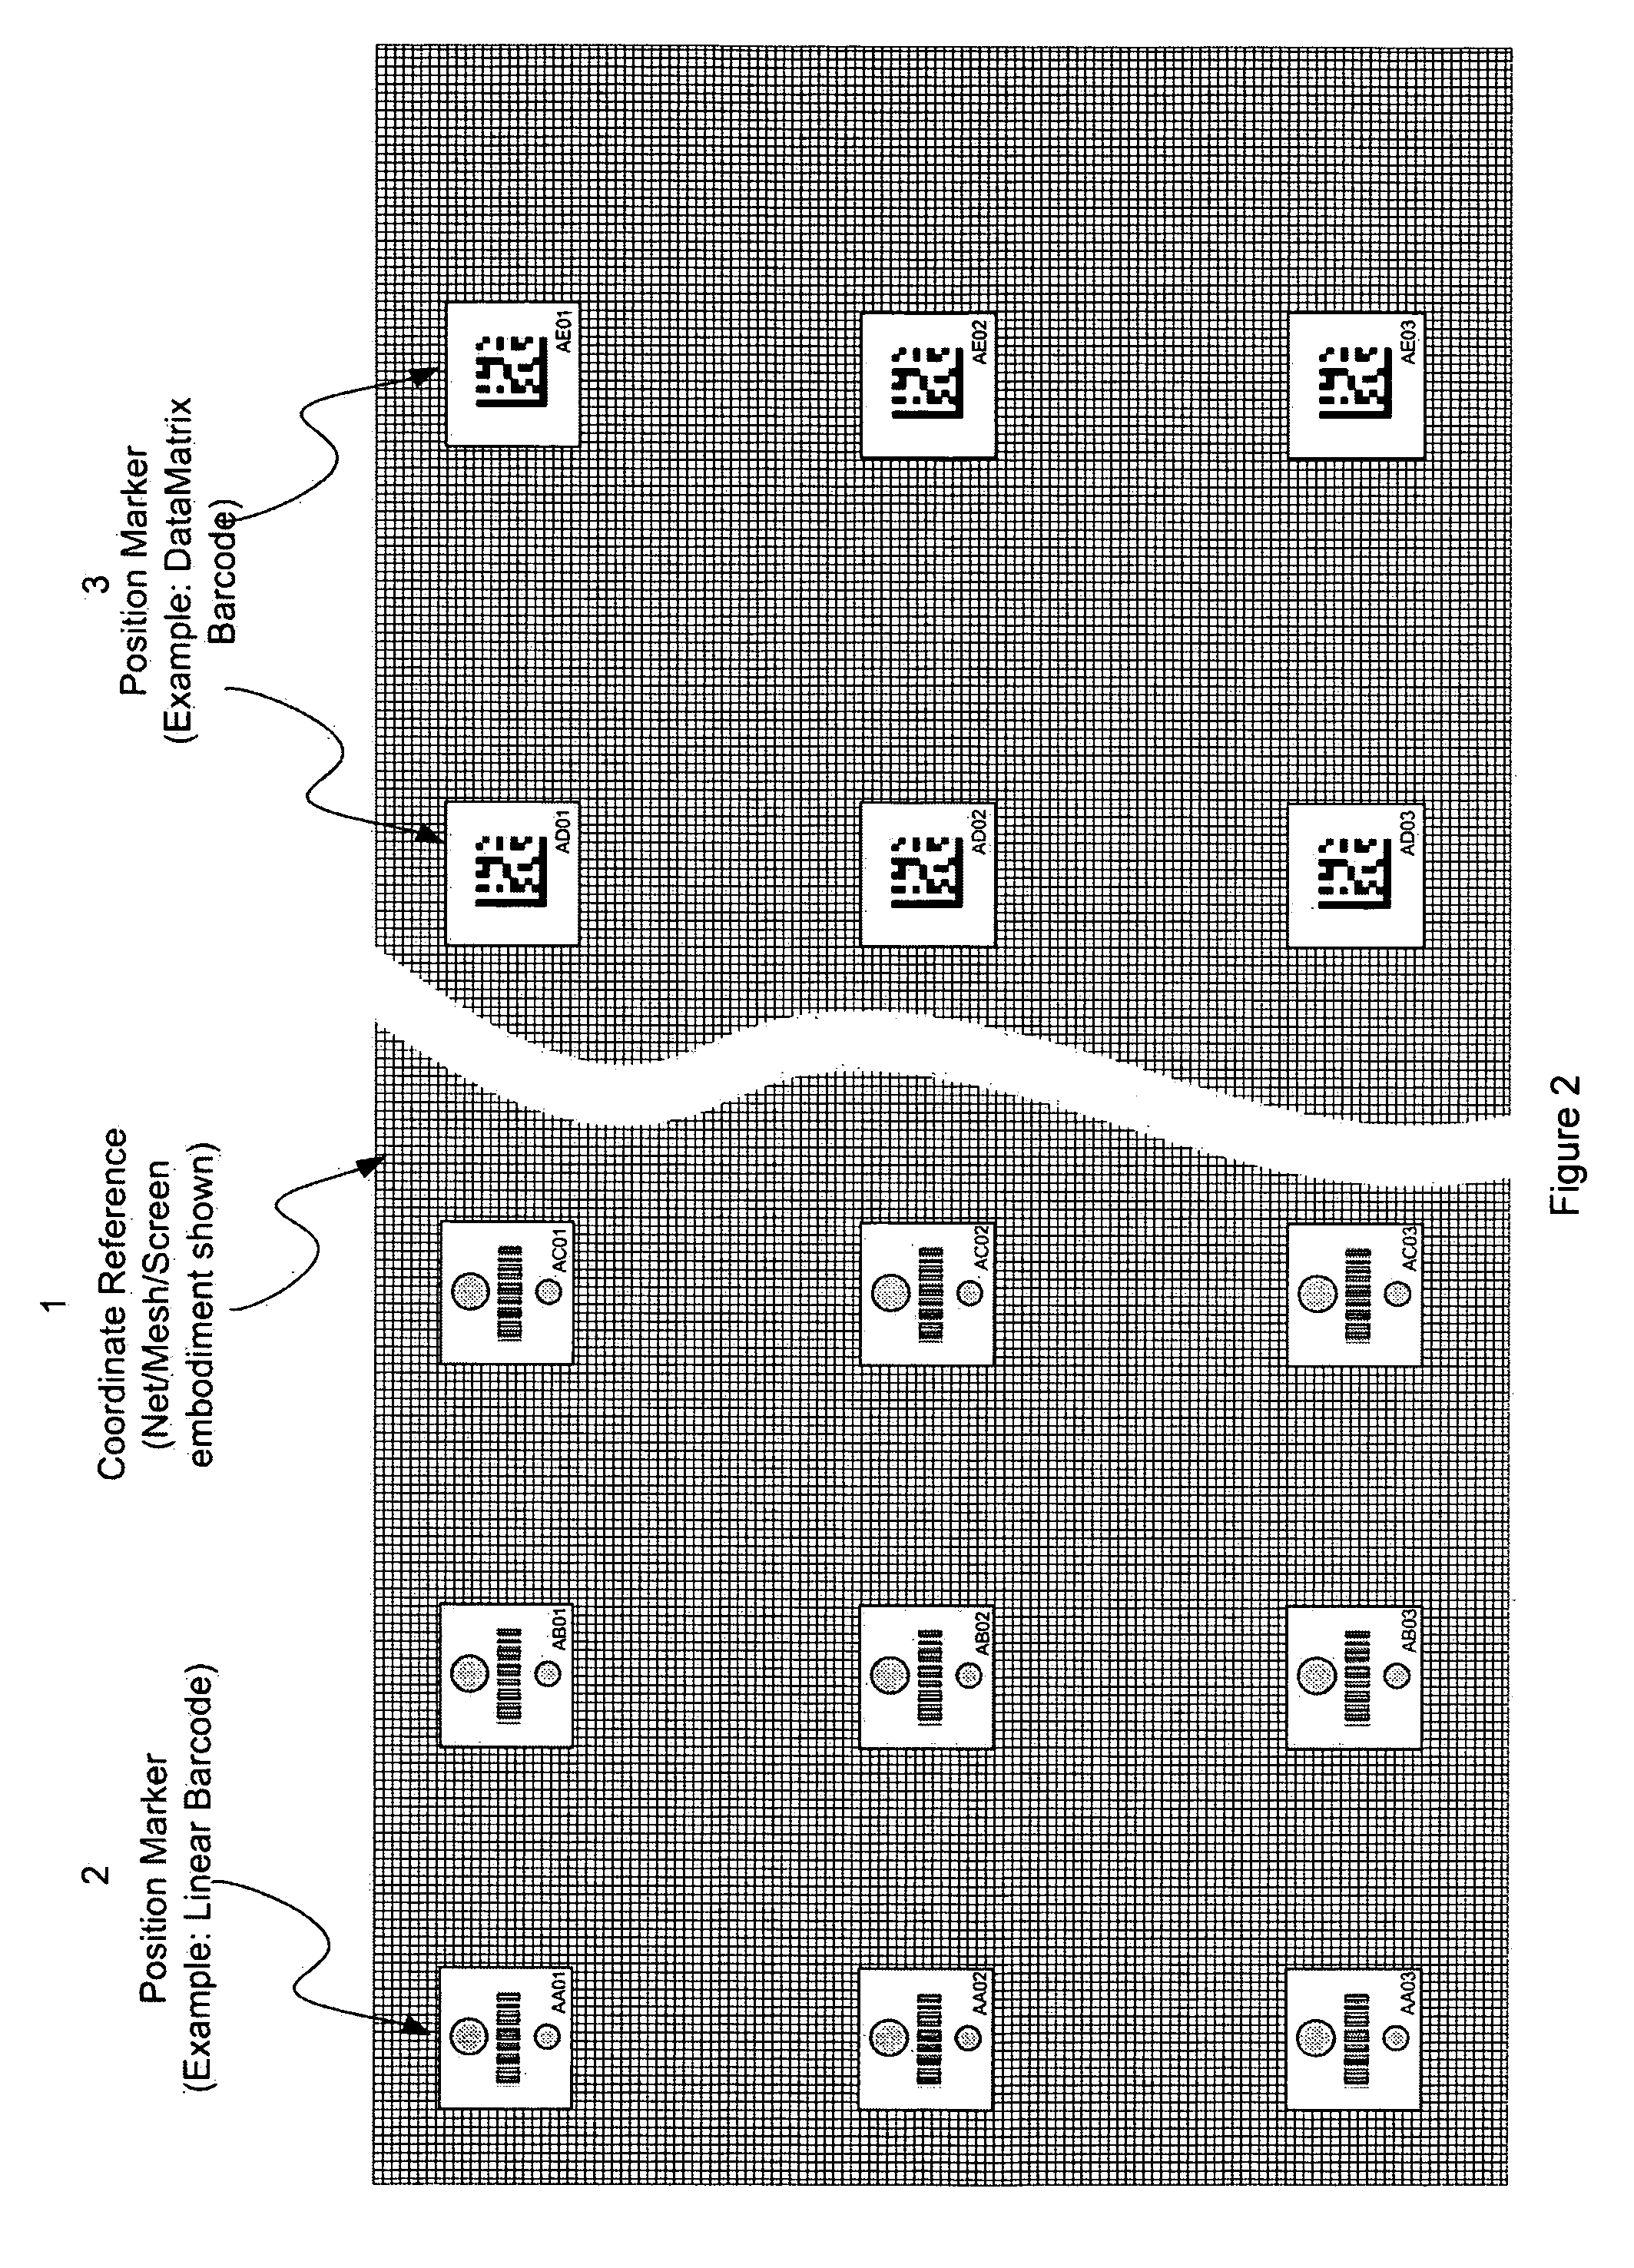 Method and apparatus for determining position and rotational orientation of an object